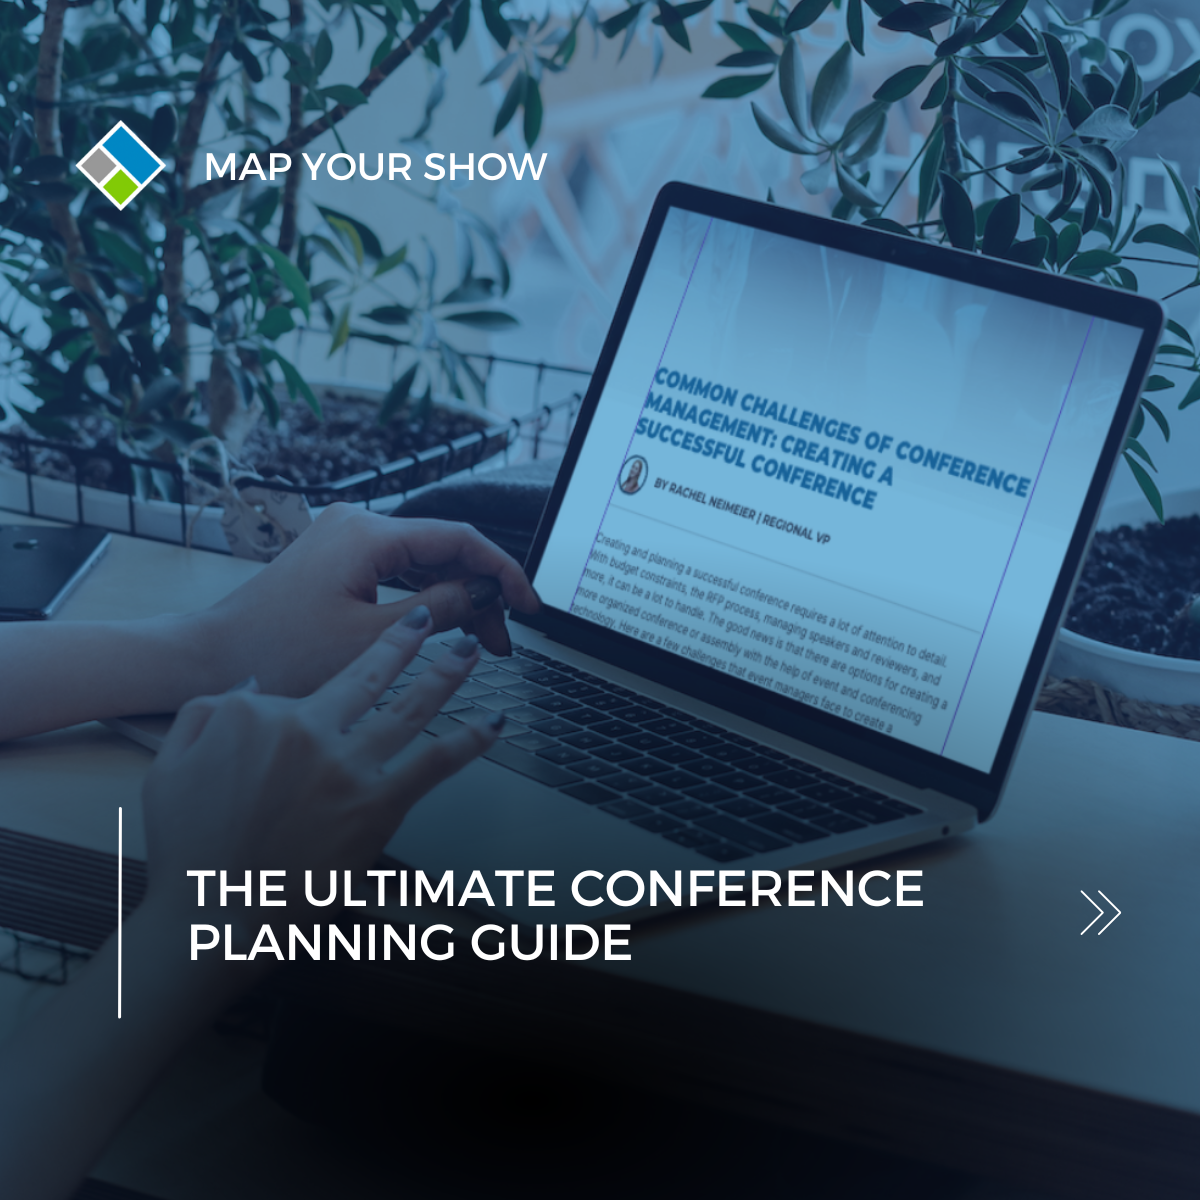 The Ultimate Conference Planning Guide - FREE Download Provided by Map Your Show.